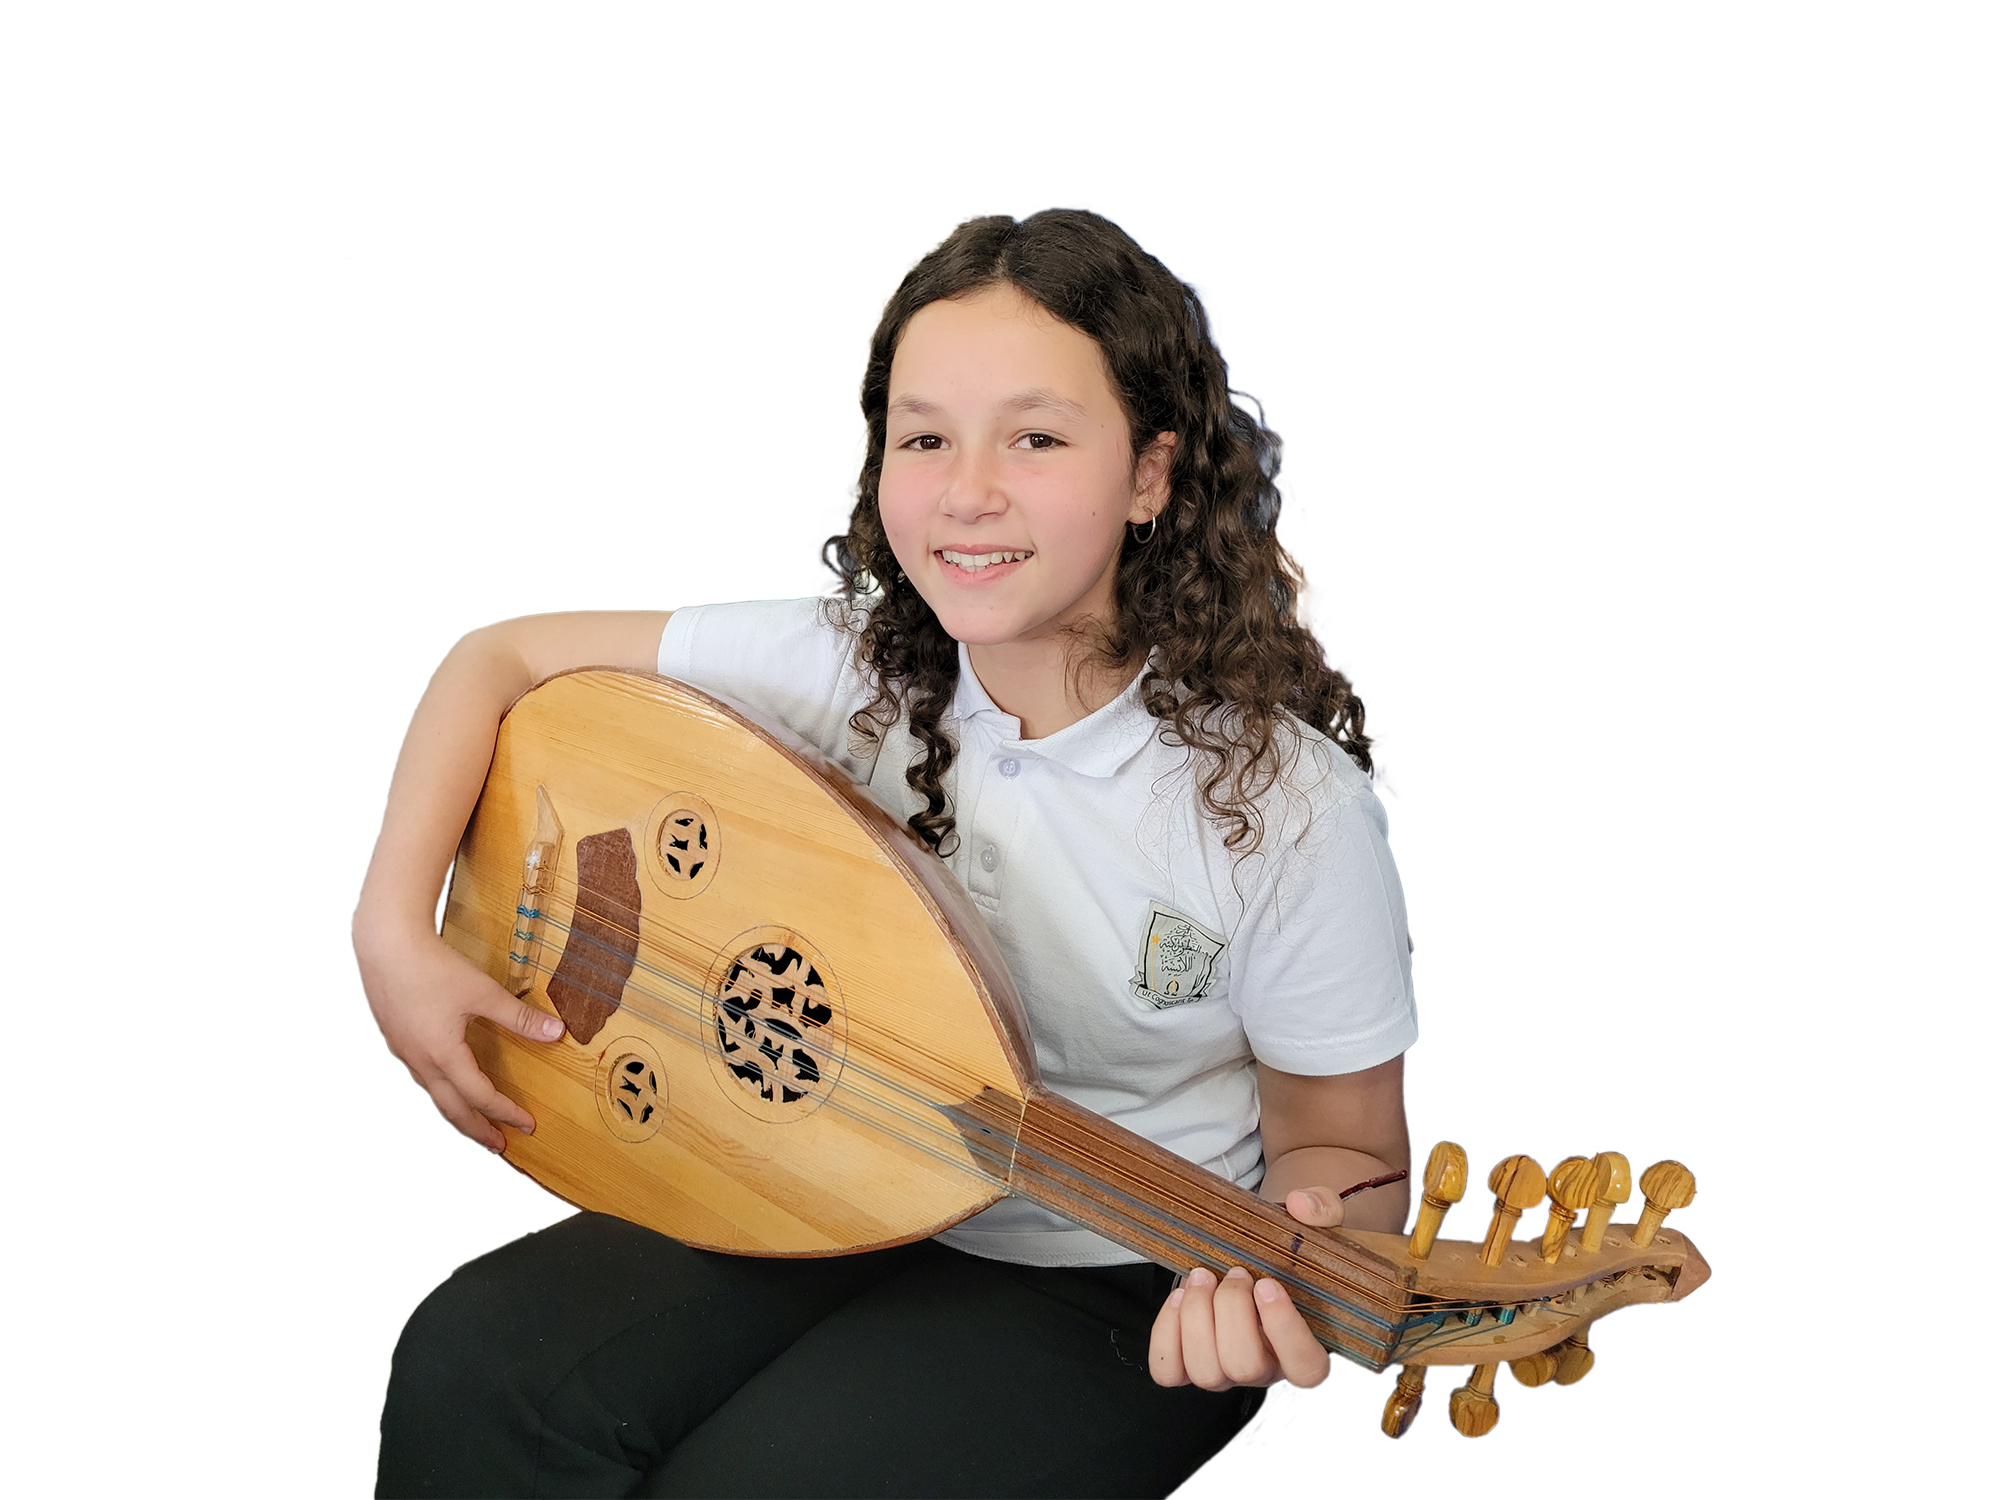 Girl from Palestine holding a traditional Palestinian instrument, the oud.